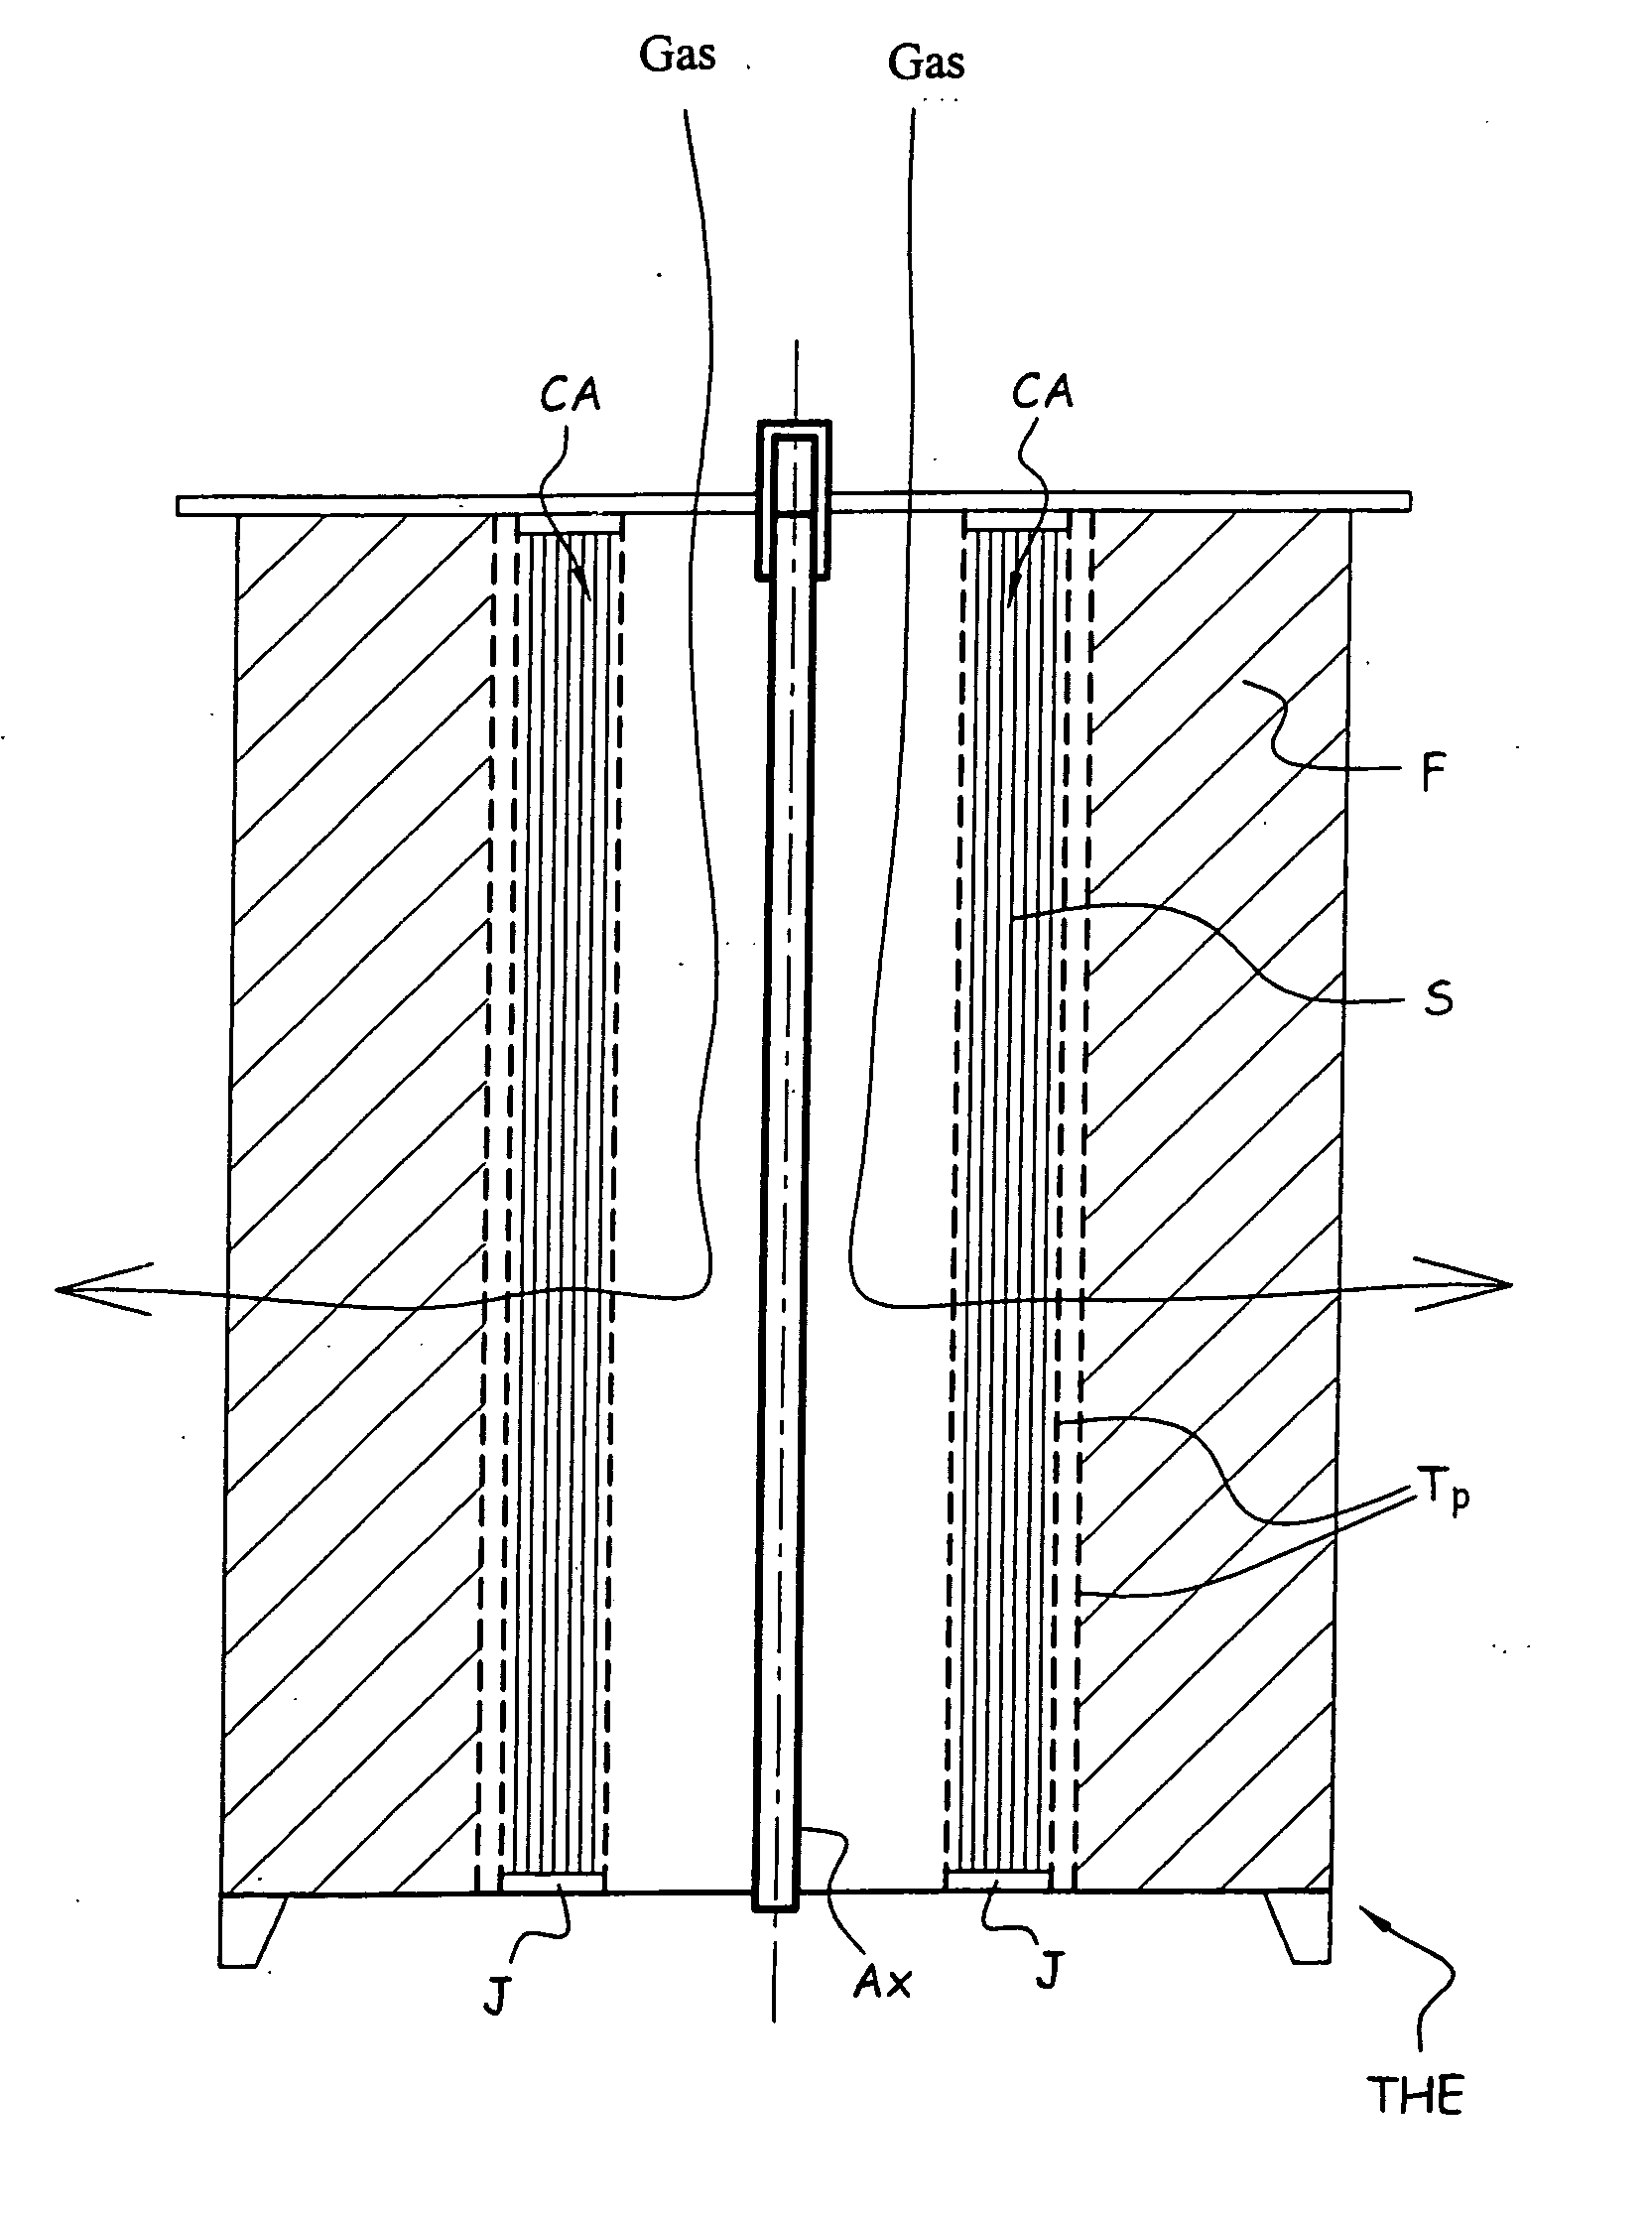 Method and device for capturing ruthenium present in a gaseous effluent